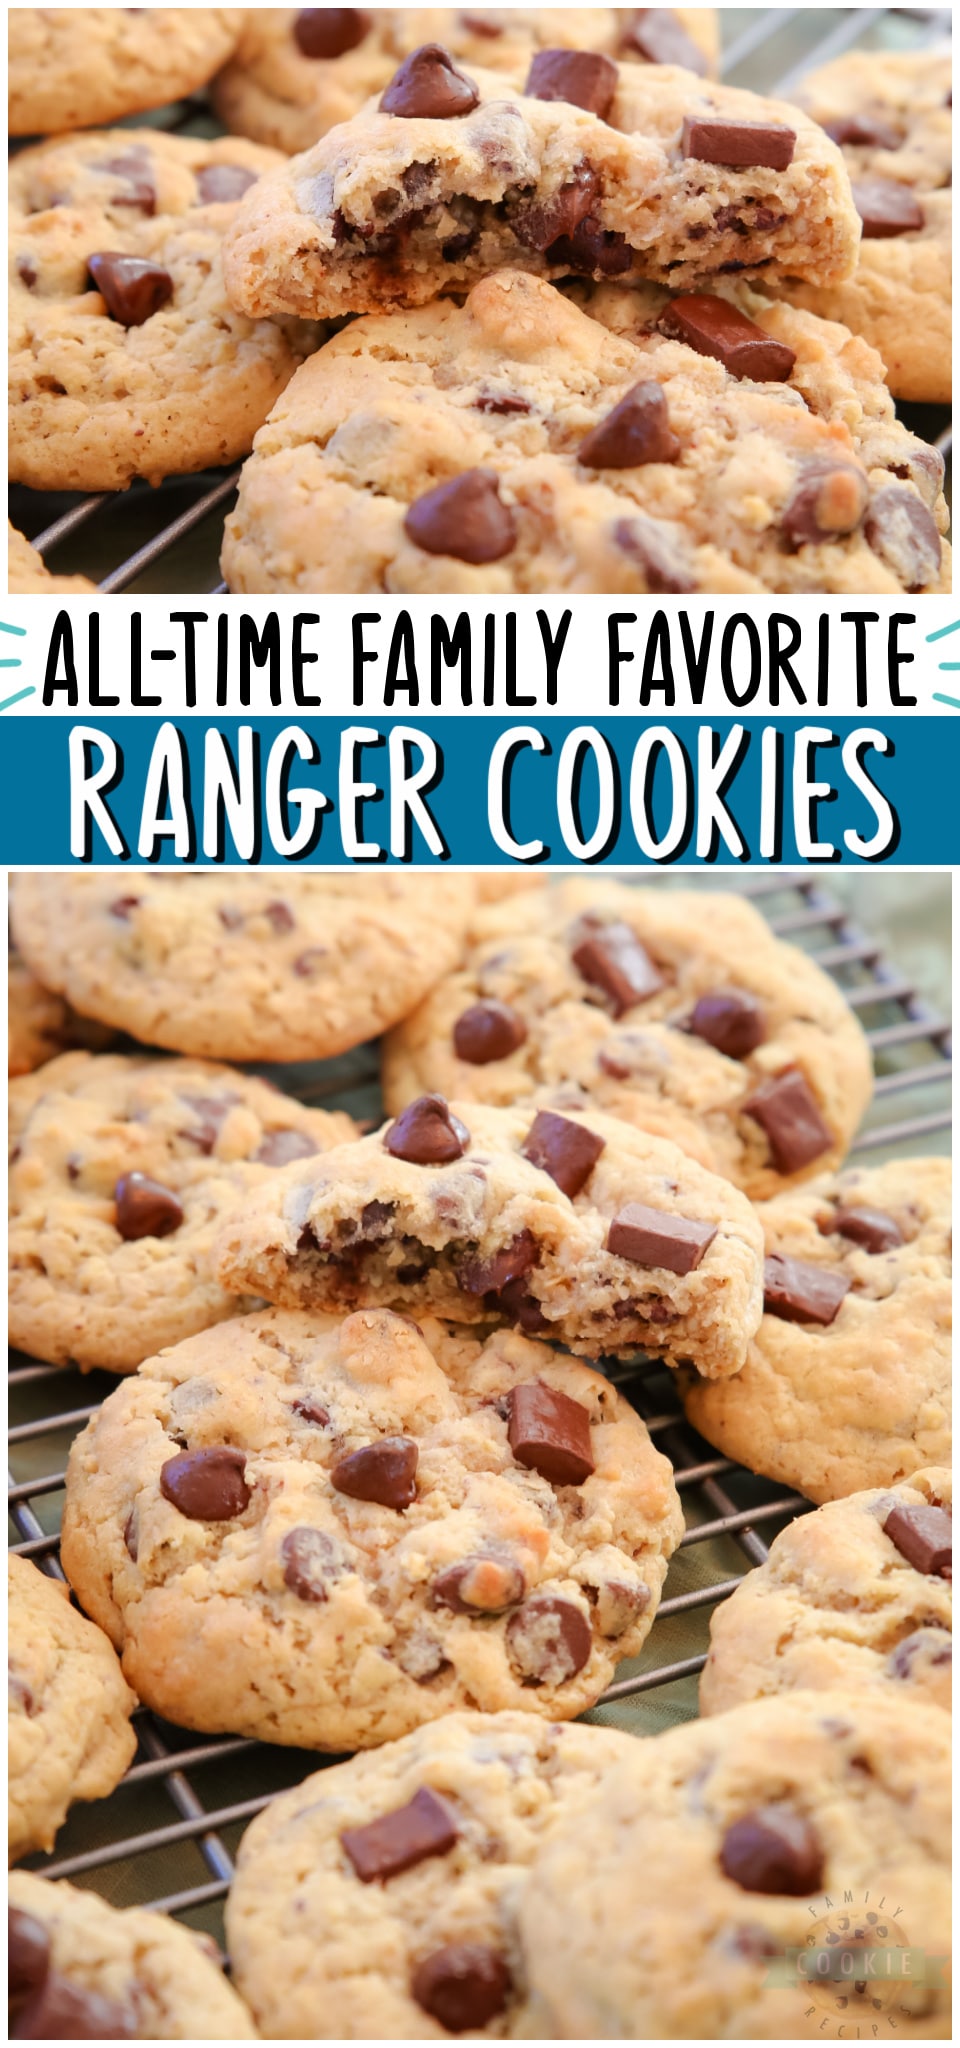 Simple Ranger Cookie recipe made with quick oats and lots of chocolate chips! Soft & chewy chocolate chip cookie with added oats for fantastic flavor & texture.